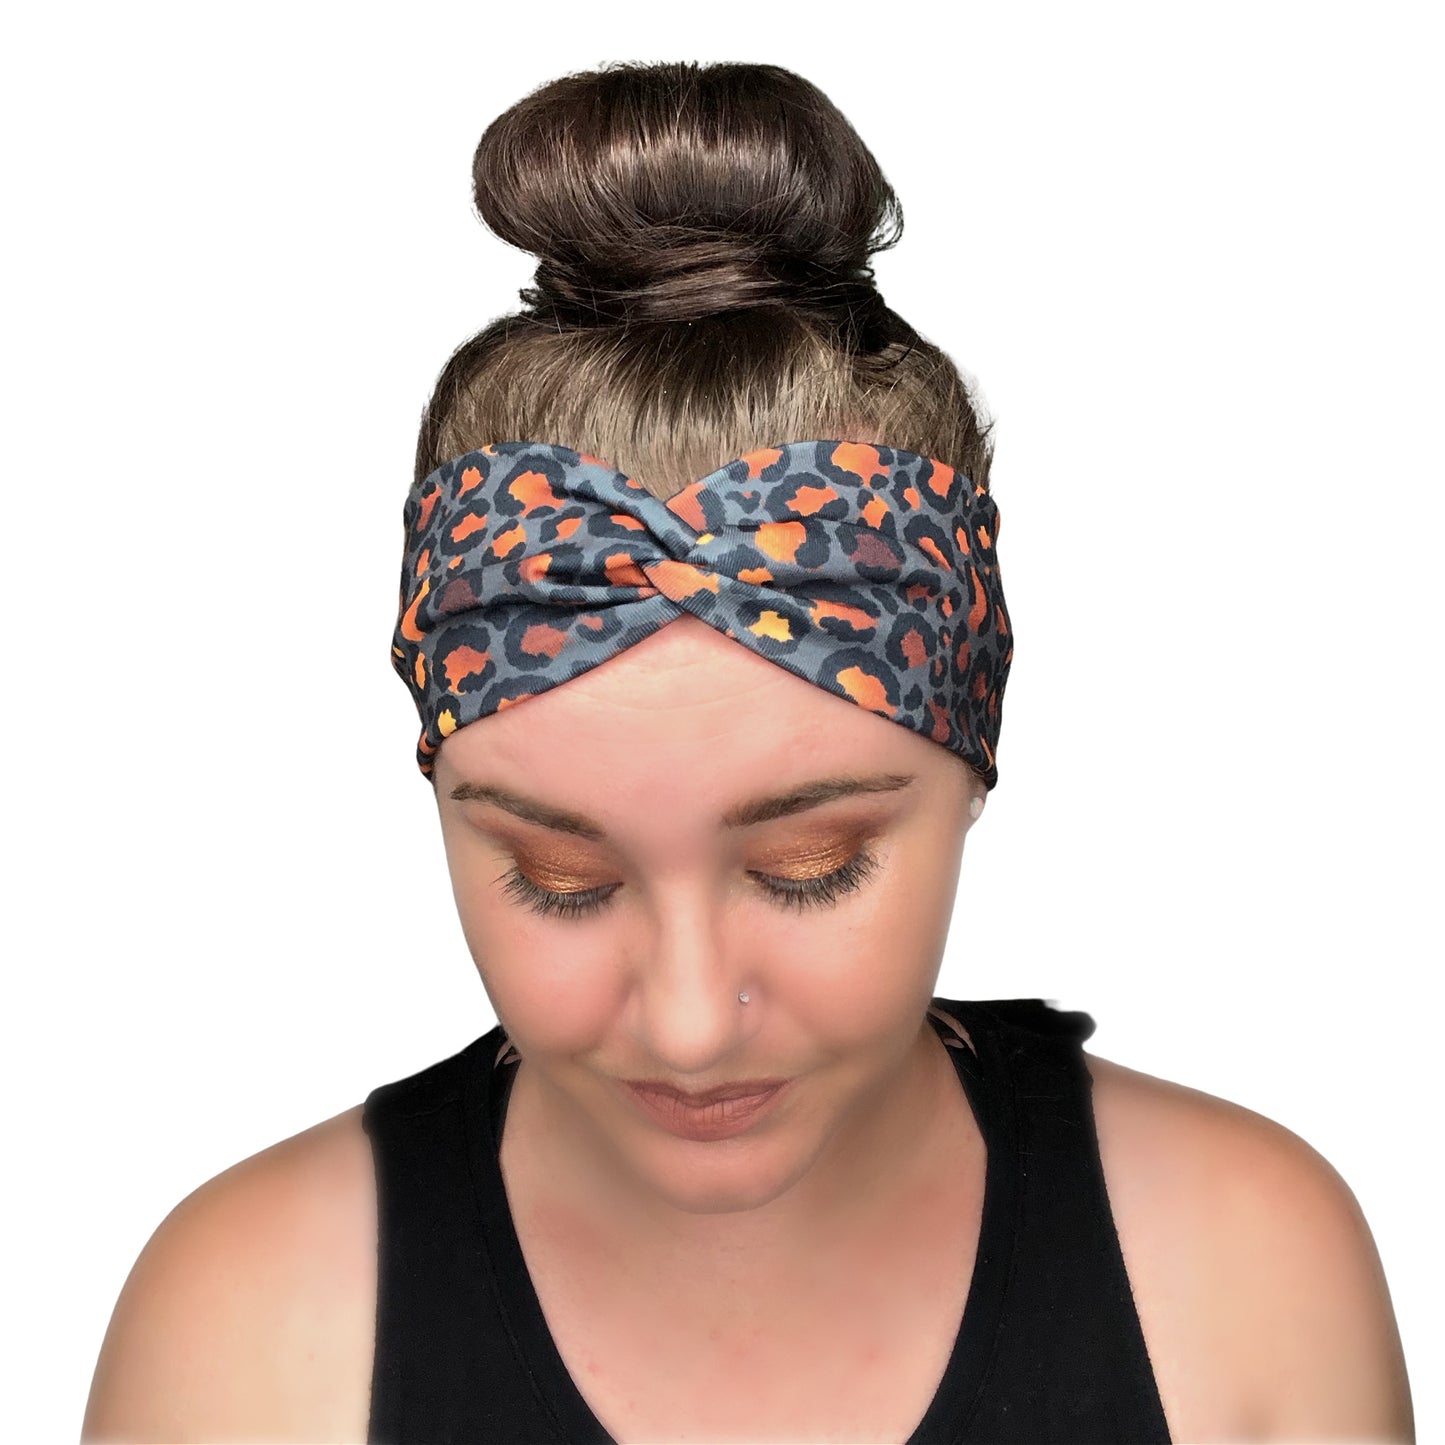 Navy Blue and Coral Floral Headband for Women